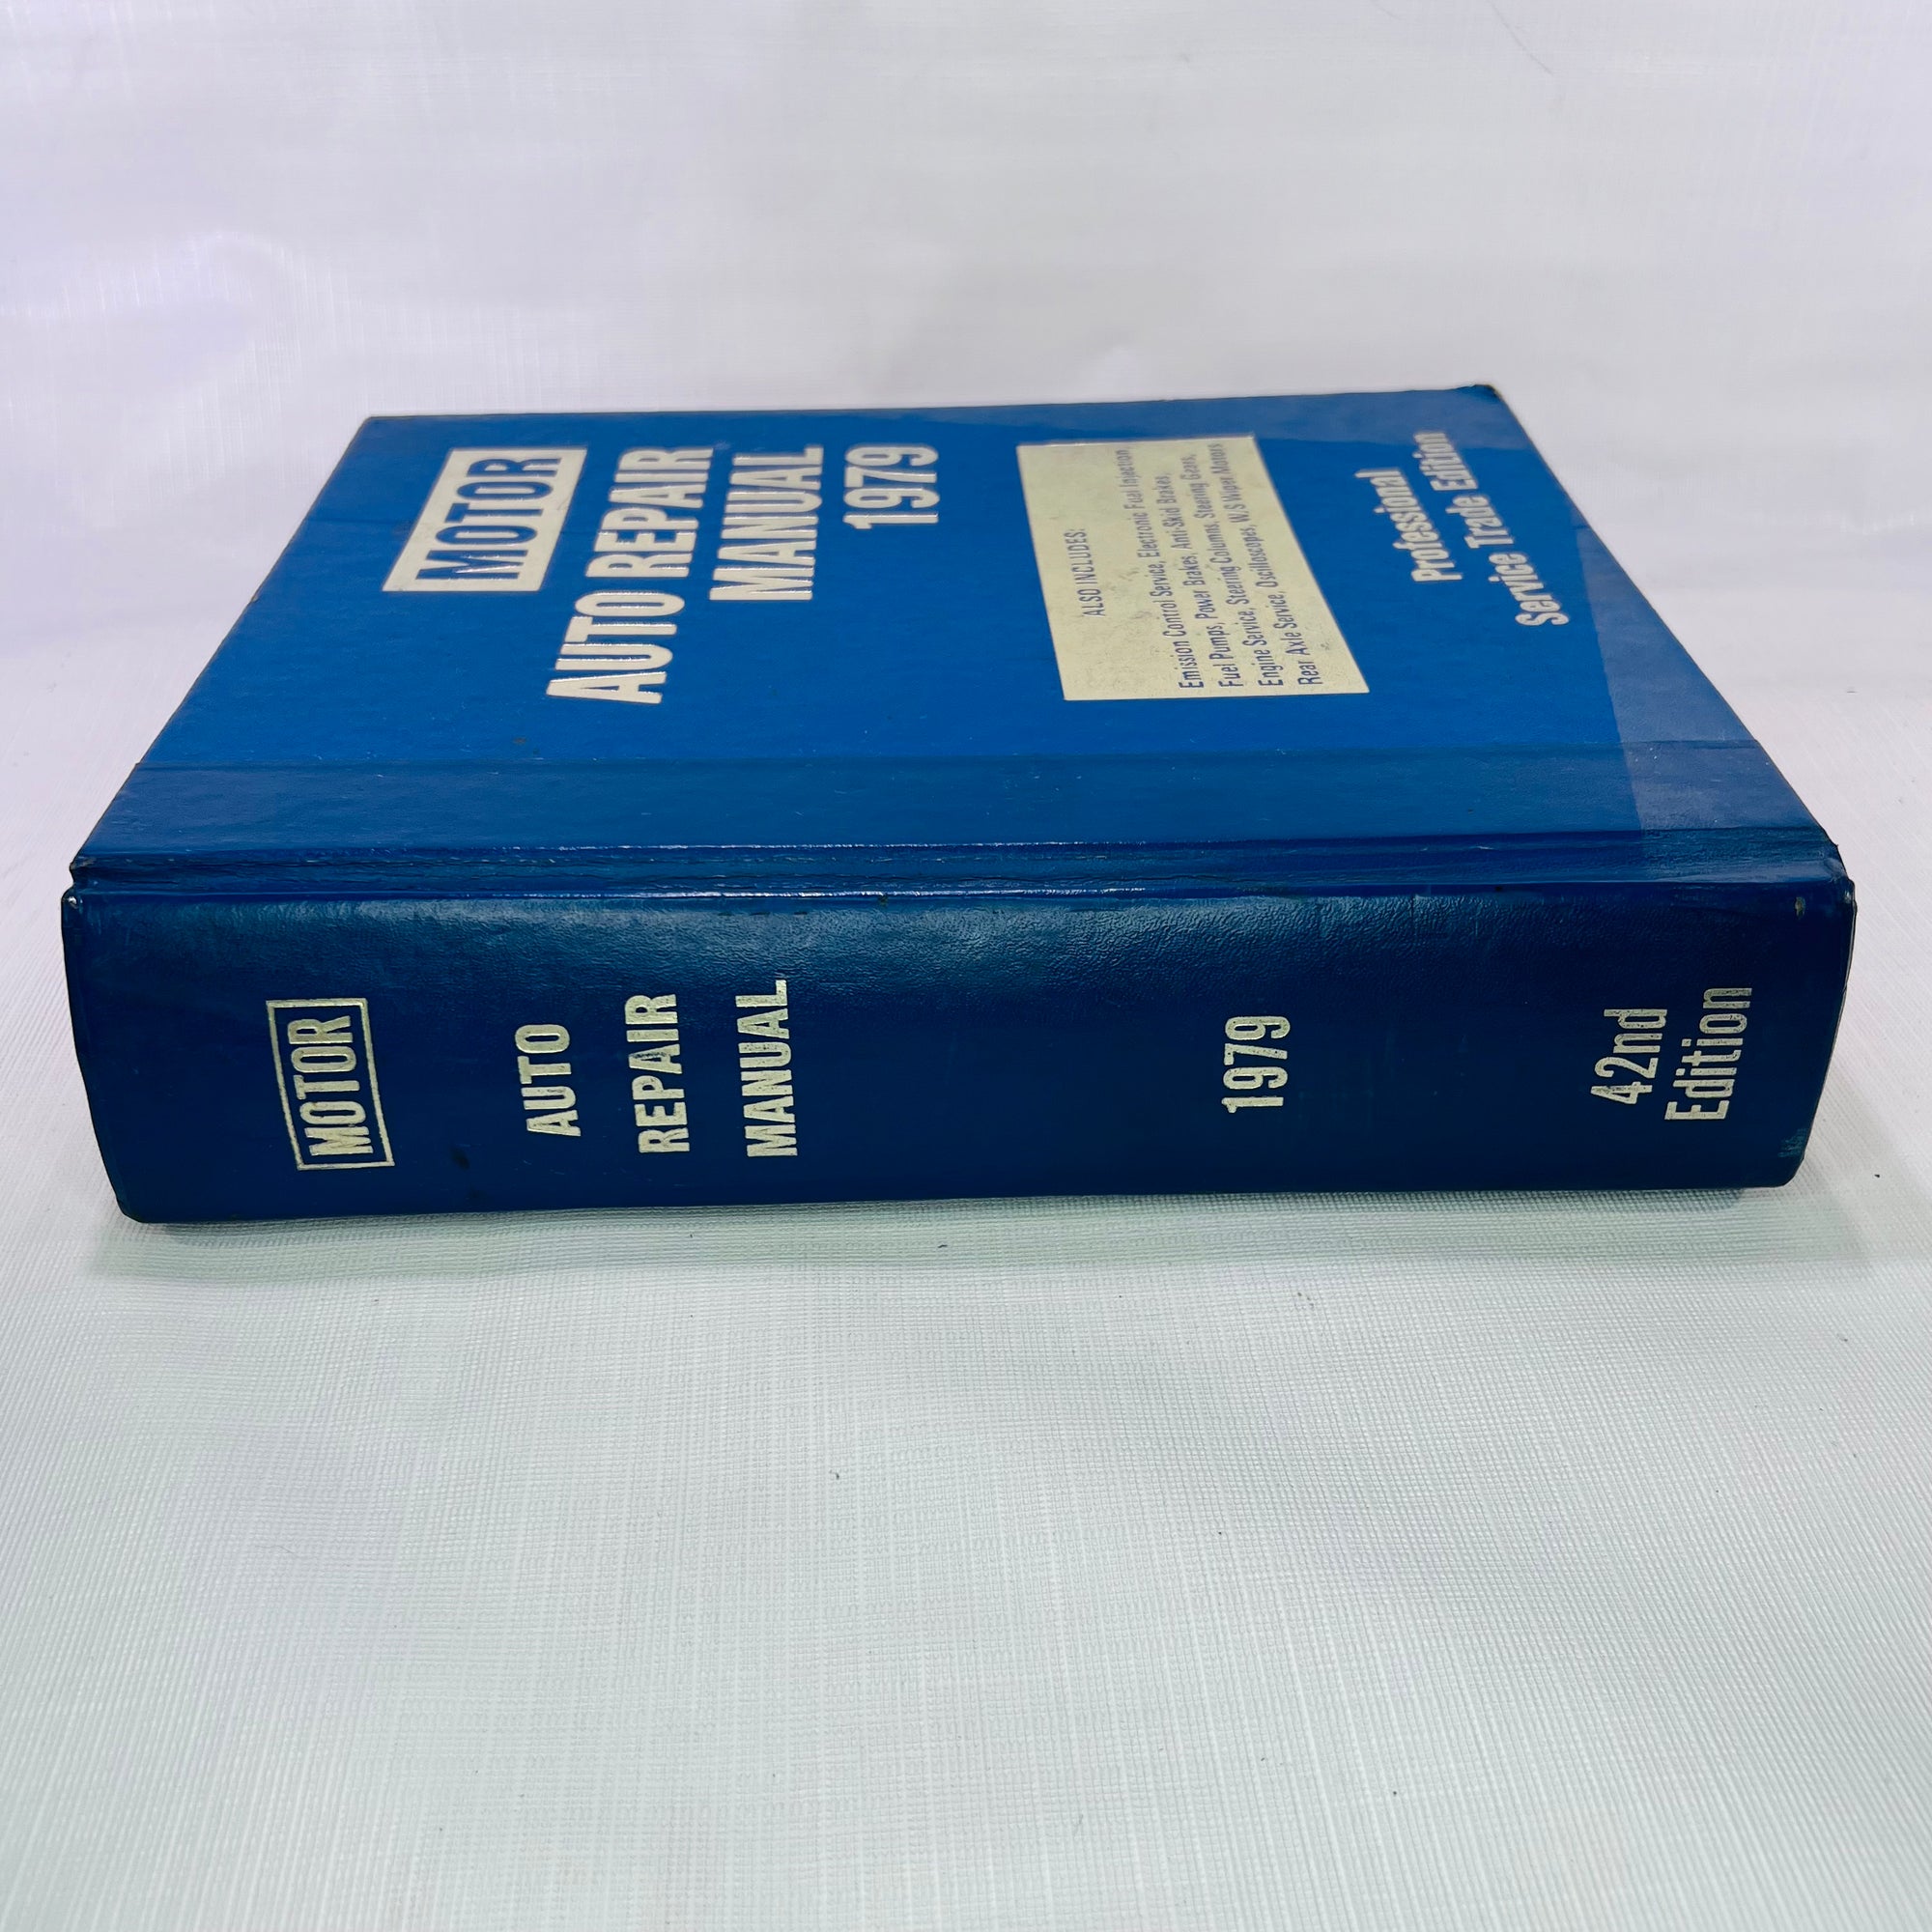 Motor Auto Repair Manual 1979 Professional Trade Edition Published by Motor